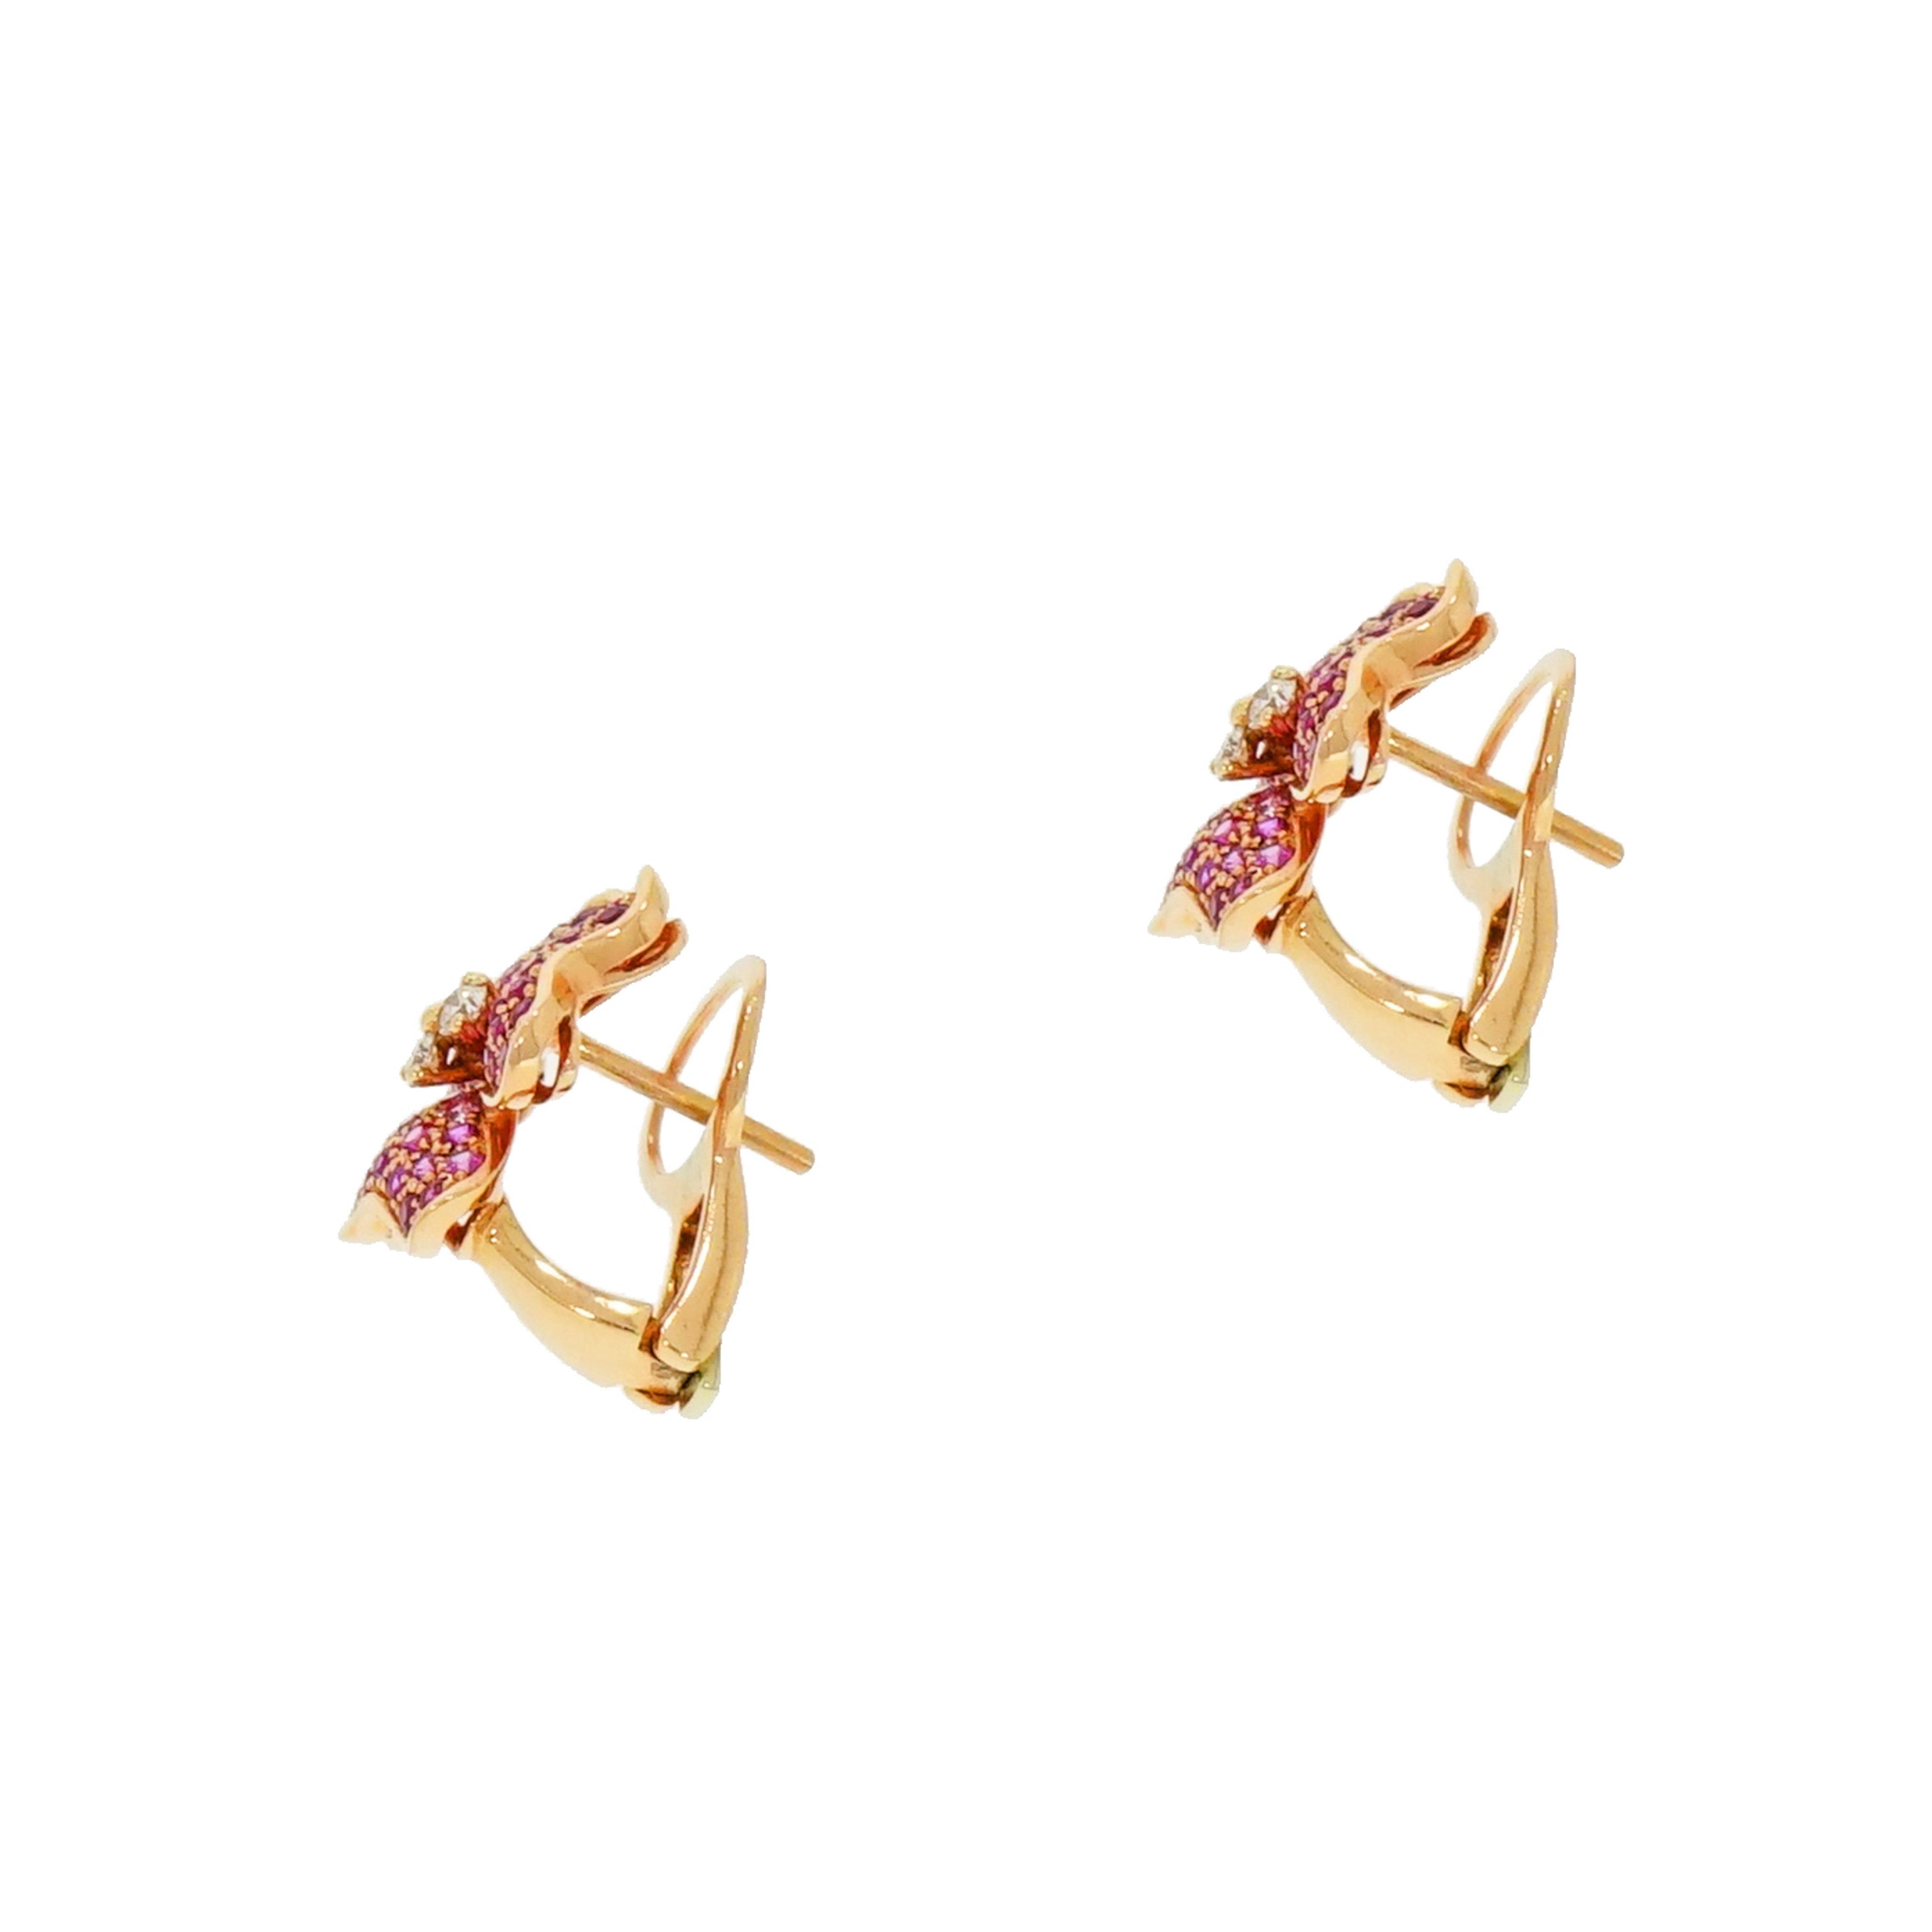 Leo Pizzo created the perfect combination of Pink Sapphires, Diamond and Rose Gold in this beautiful flower earrings!!
Handcrafted in Italy by experienced master craftsmen in 18K rose gold with a total of 1.16 carats round pink sapphires and 0.17